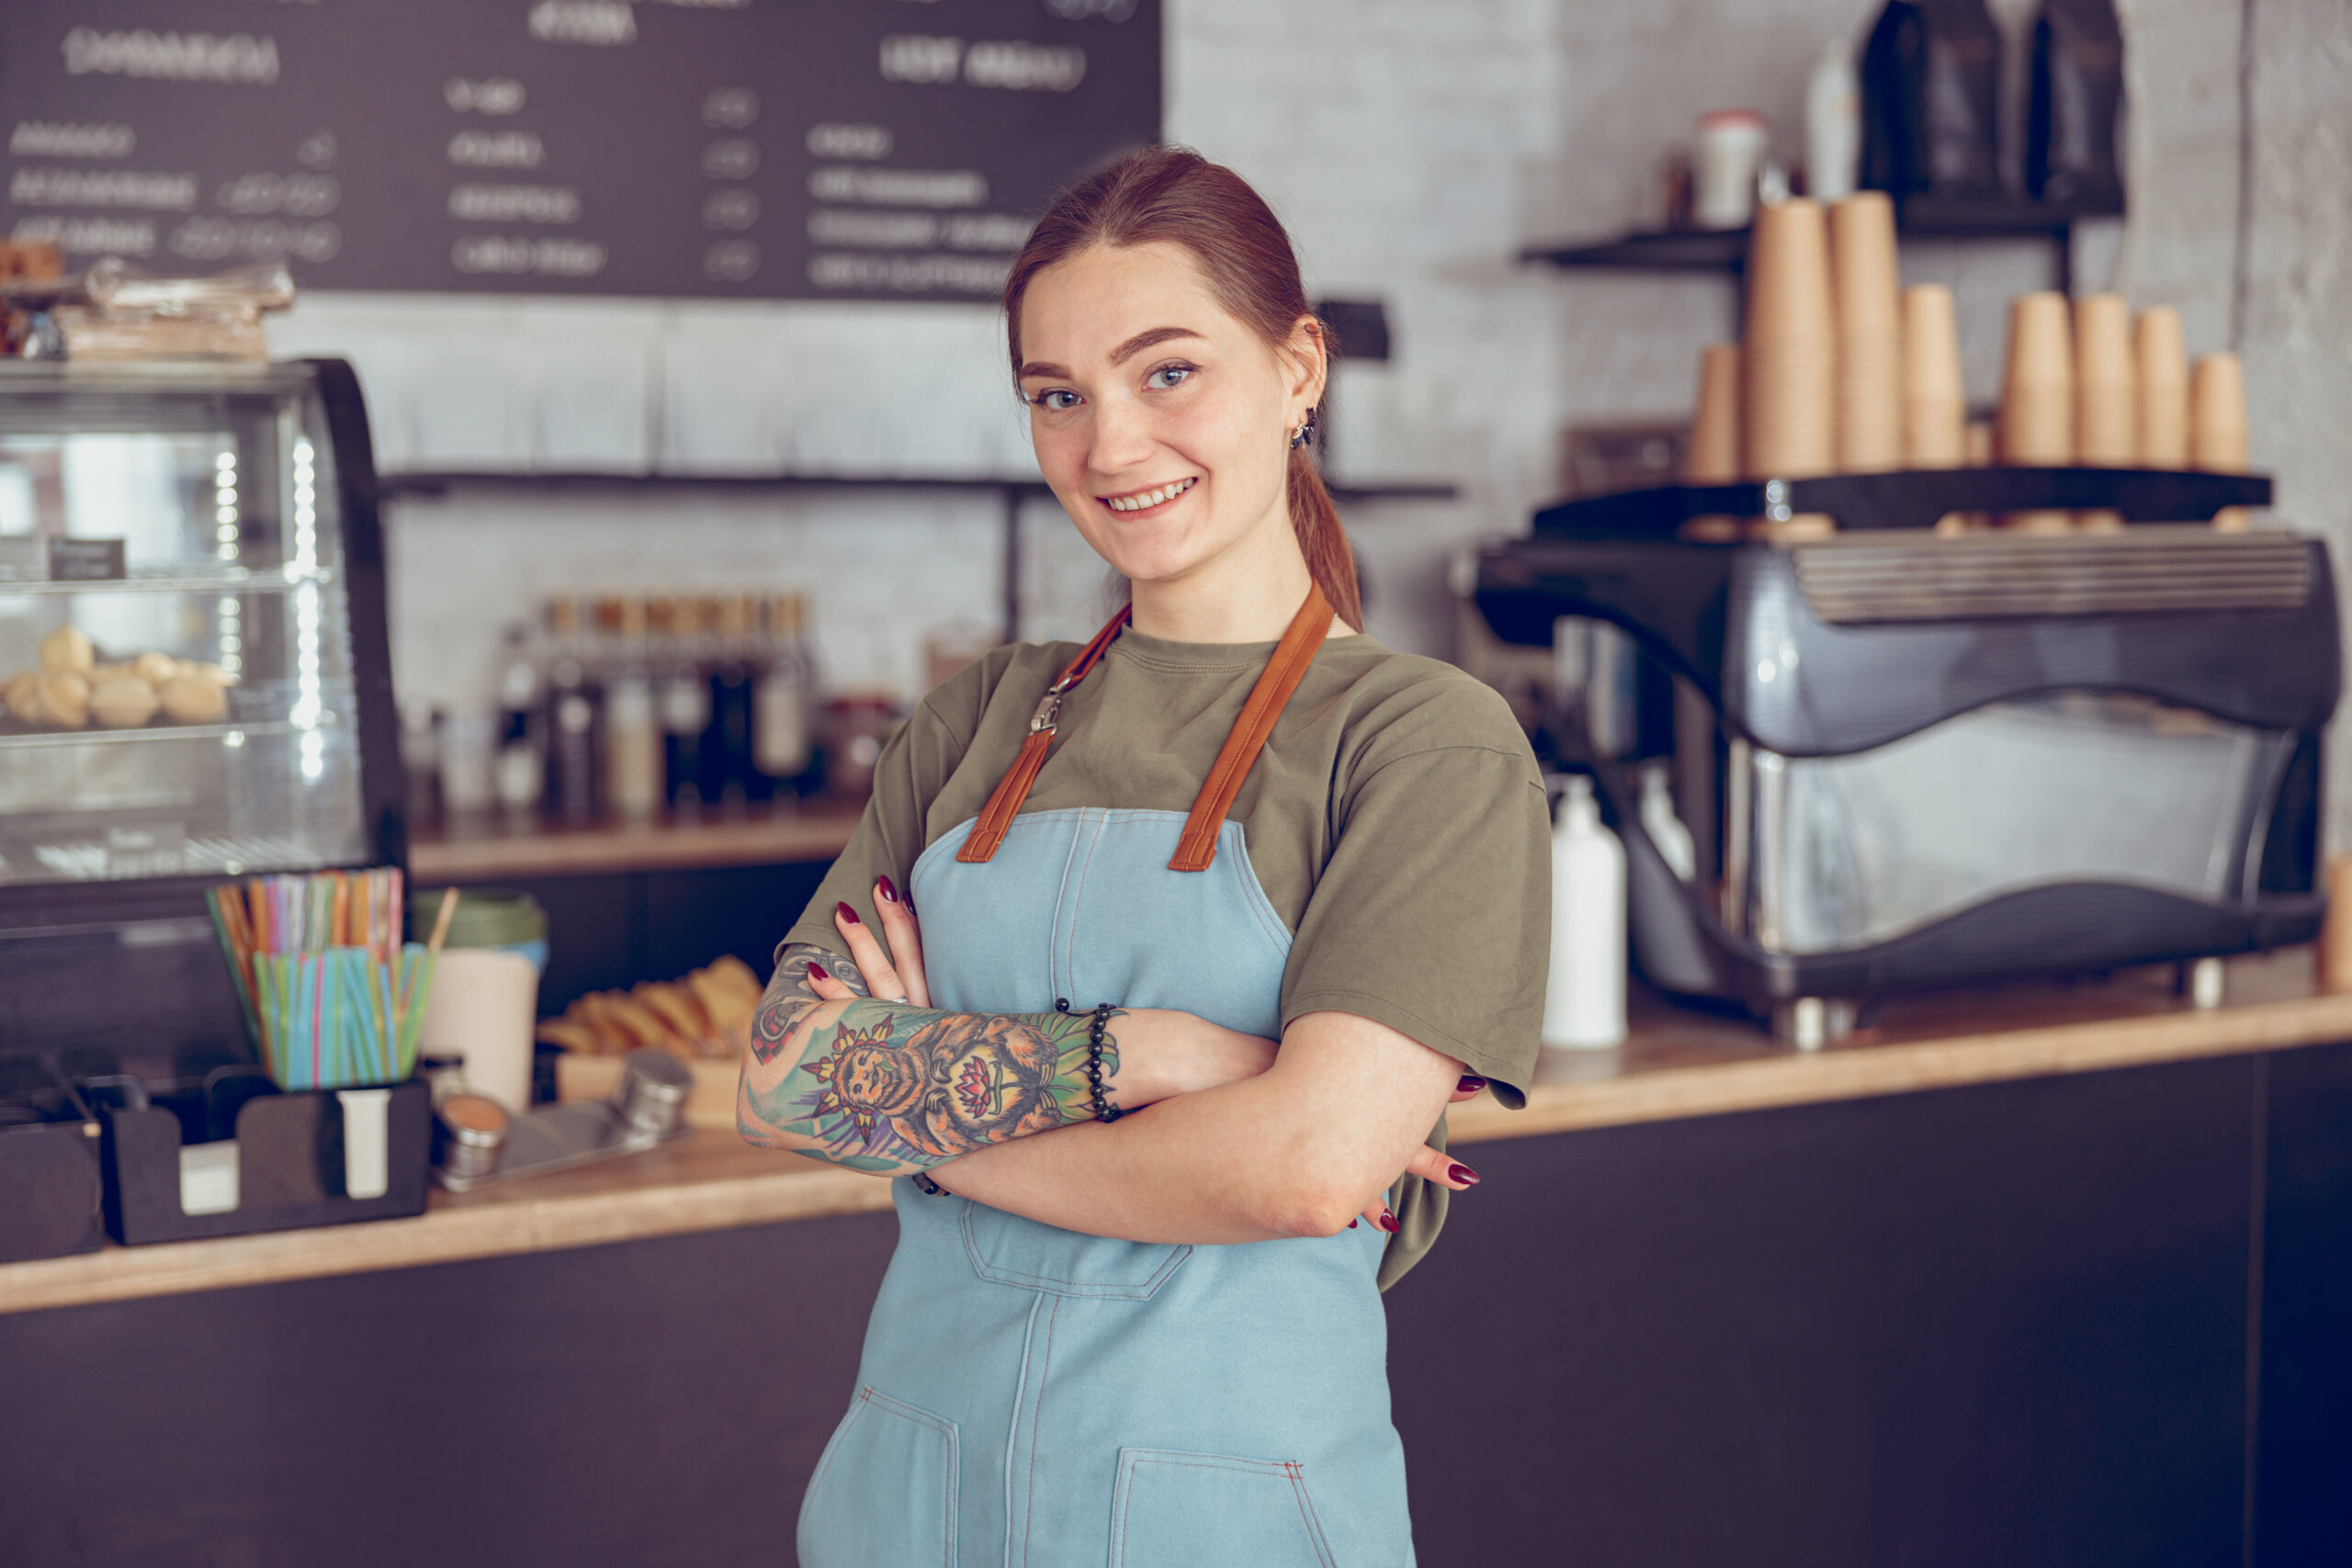 Joyful young woman cafe worker looking at camera and smiling while crossing arms over her chest